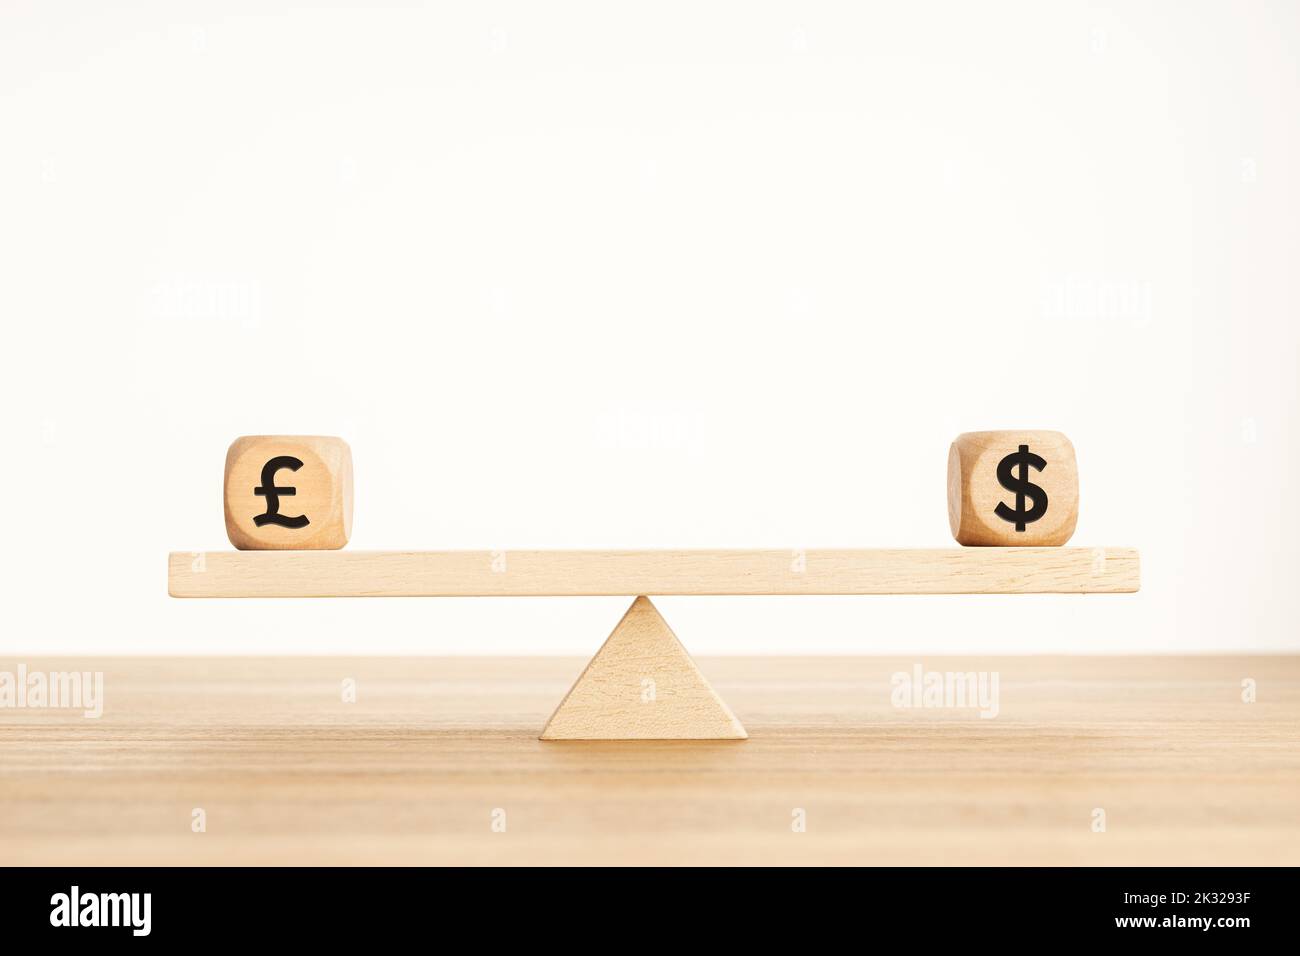 Pound and dollar parity concept. Sterling and US dollar symbol on wooden cube shape on a seesaw. Copy space Stock Photo